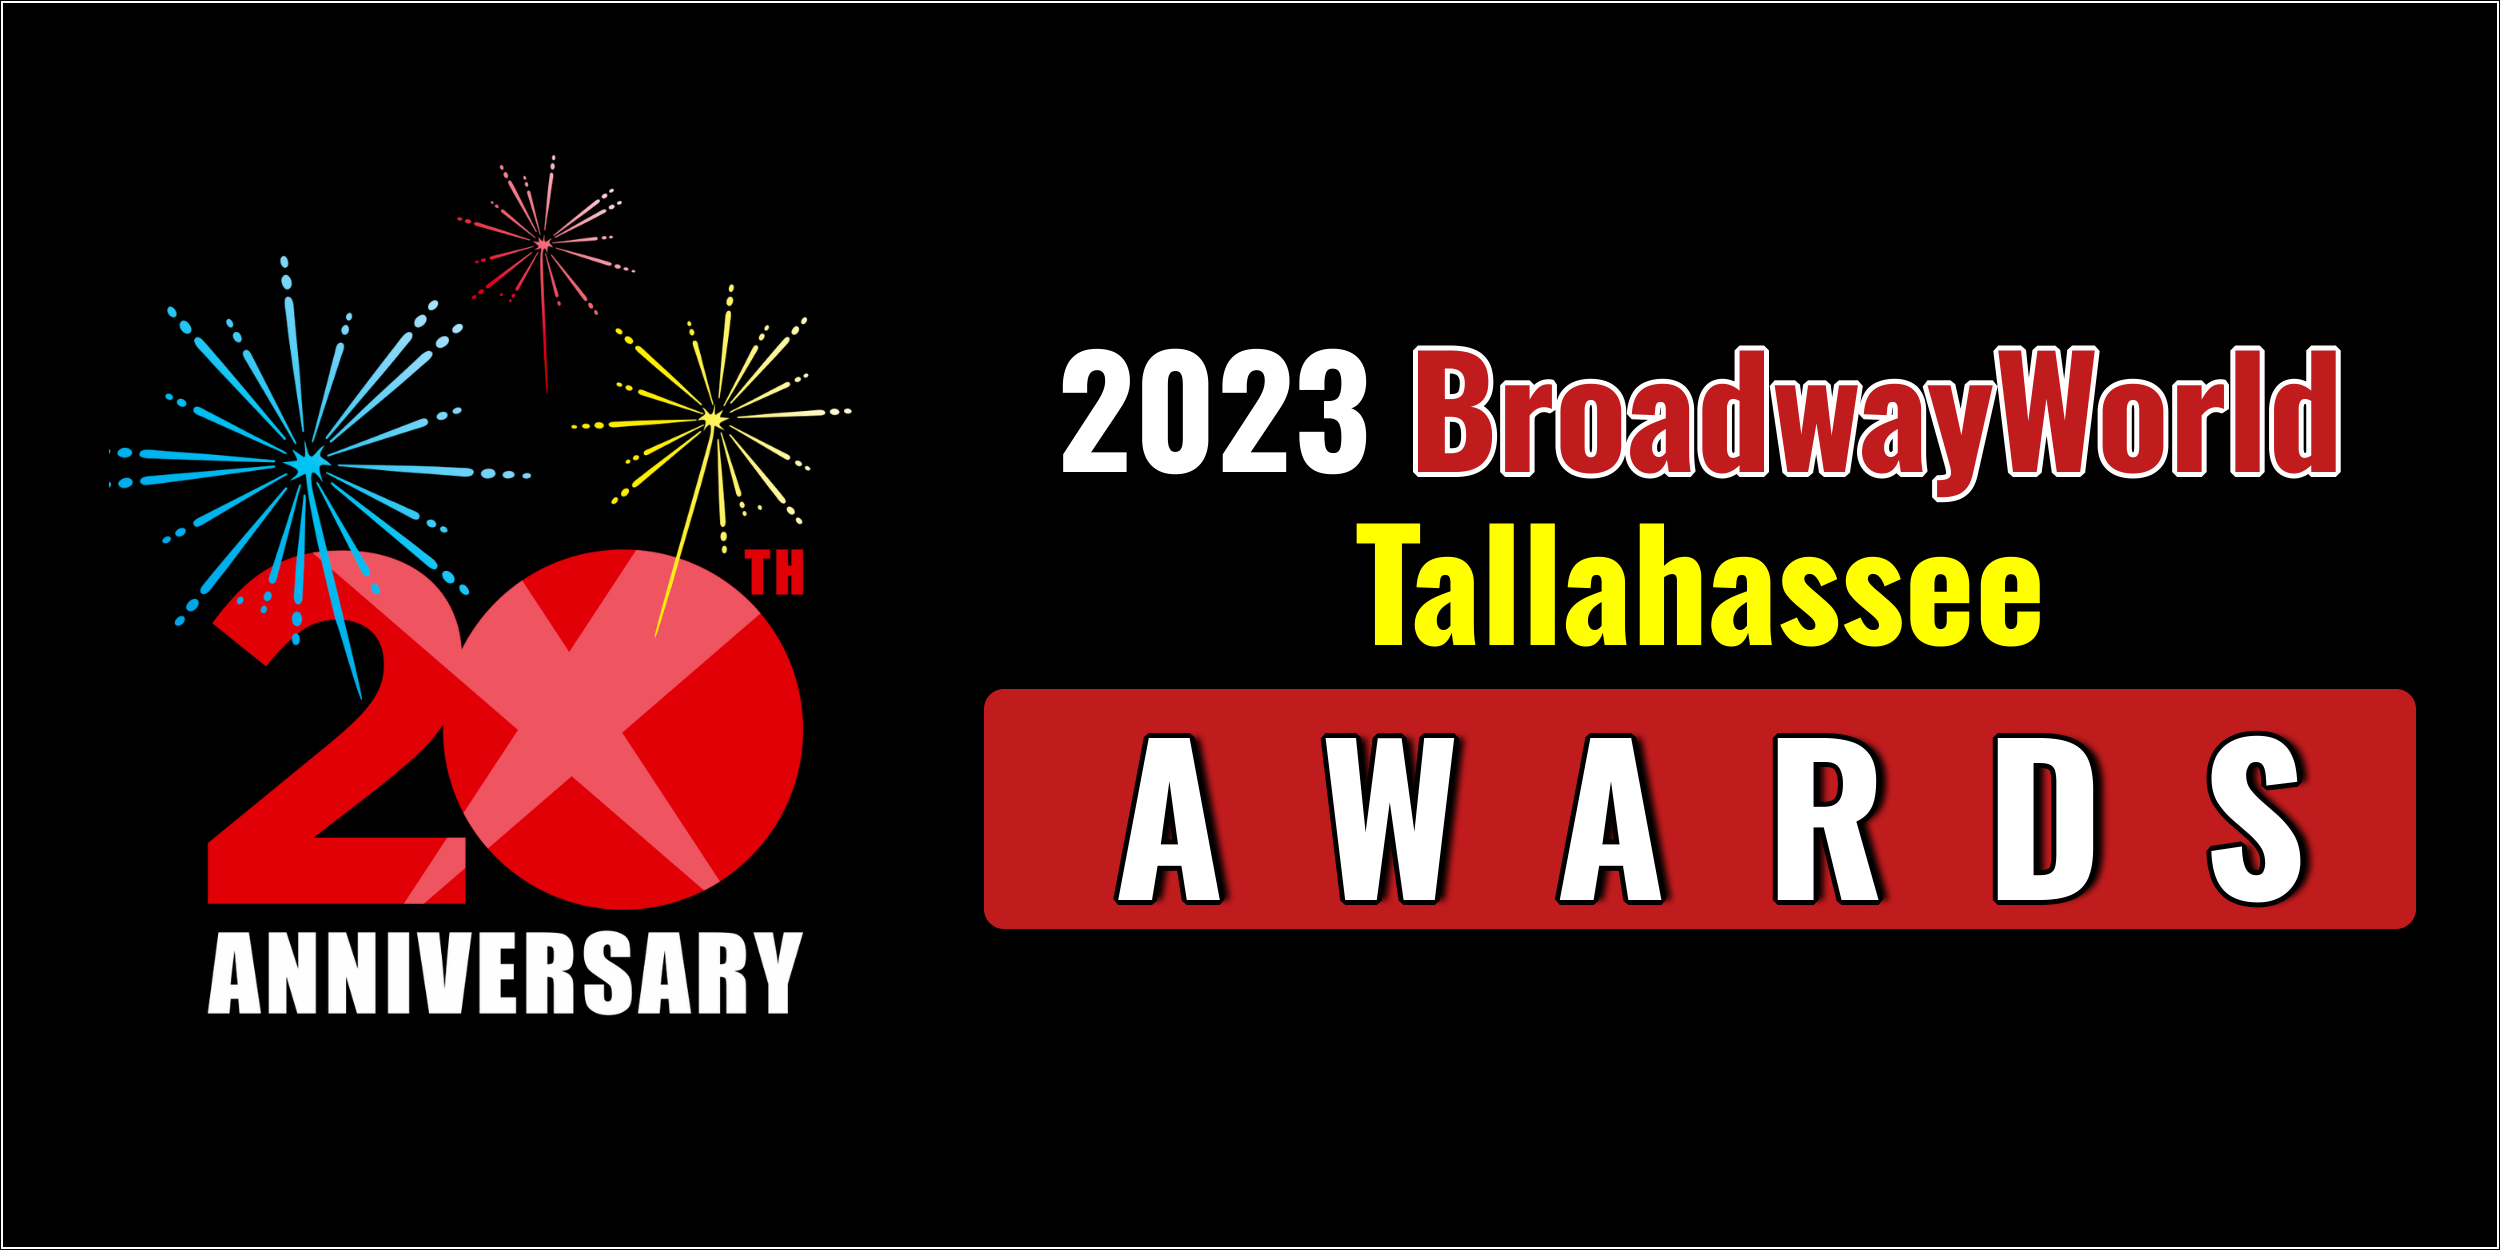 Latest Standings Announced For The 2023 BroadwayWorld Tallahassee Awards; SPAMALOT Leads B Photo